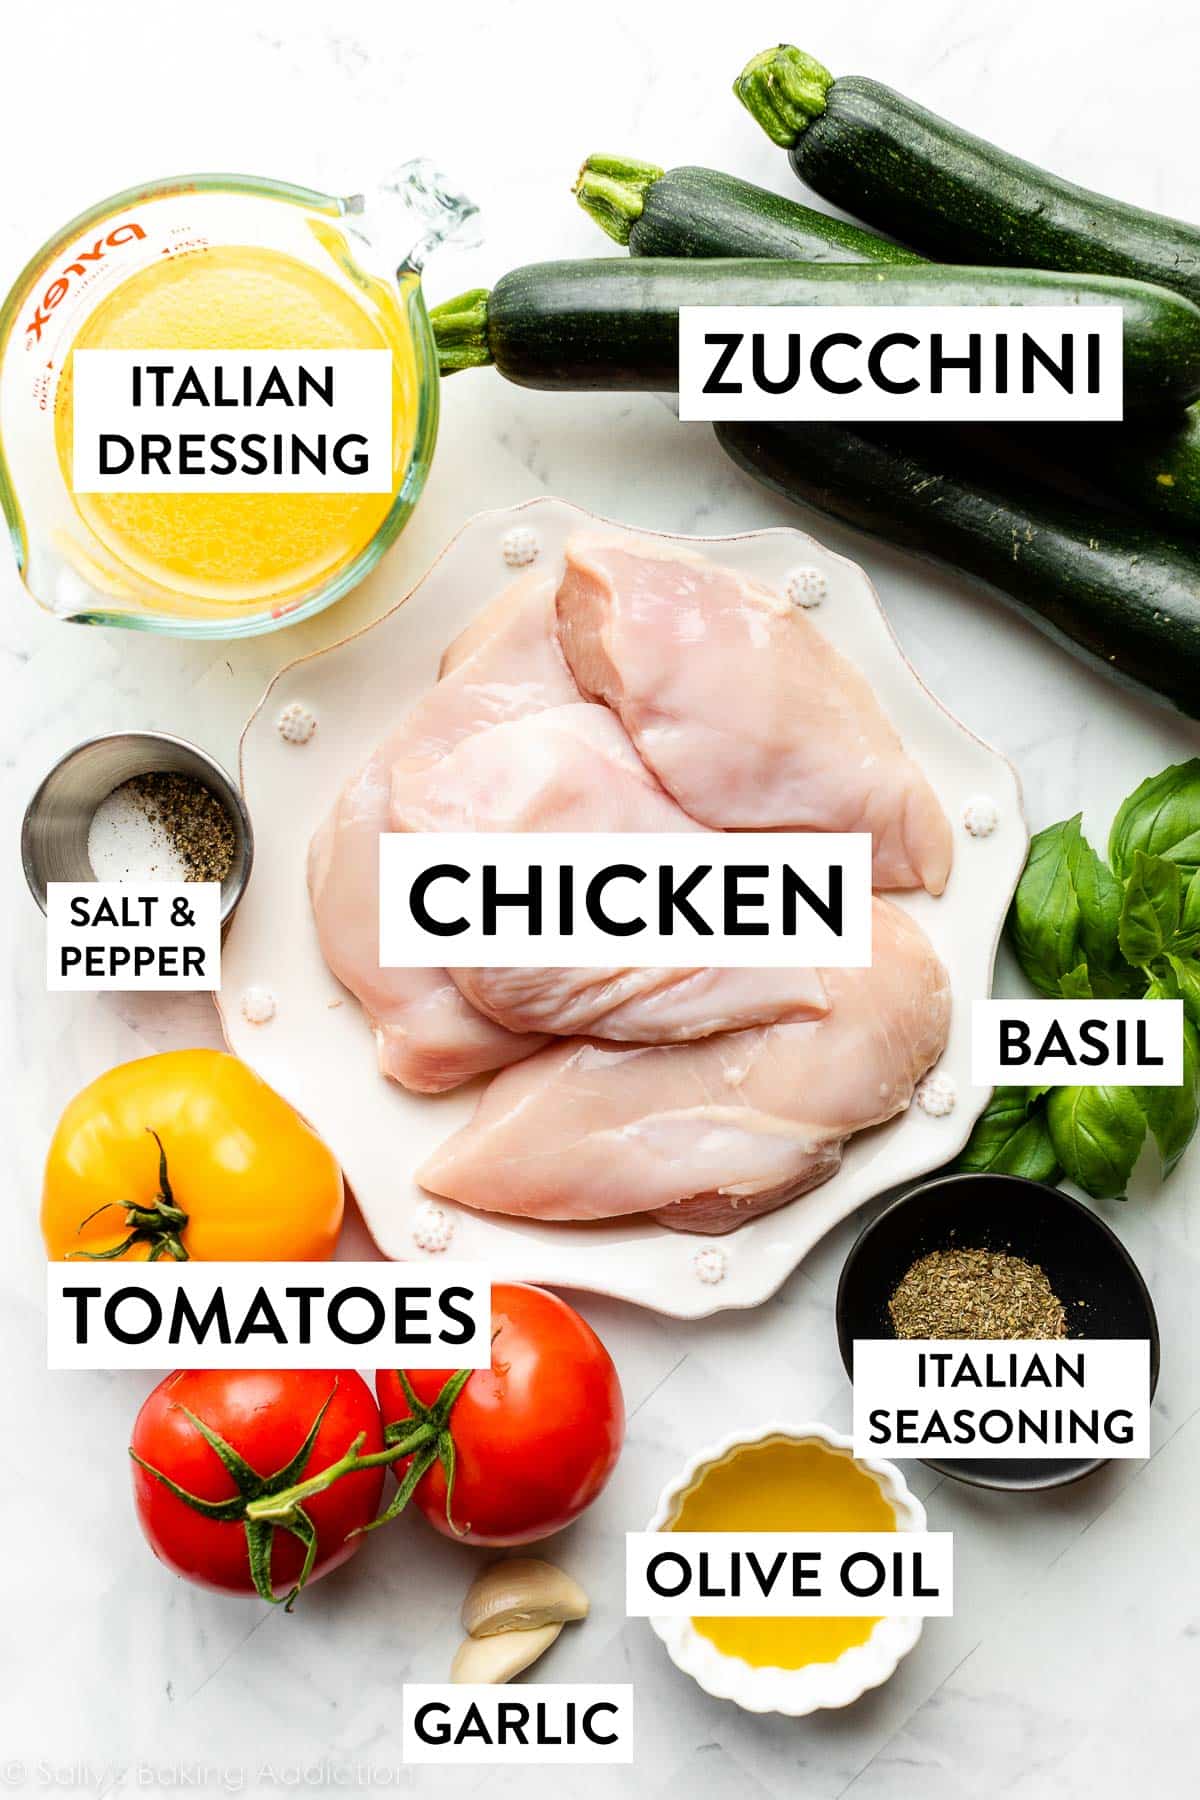 ingredients on counter including zucchini, basil, chicken on a plate, tomatoes, and 2 garlic cloves.